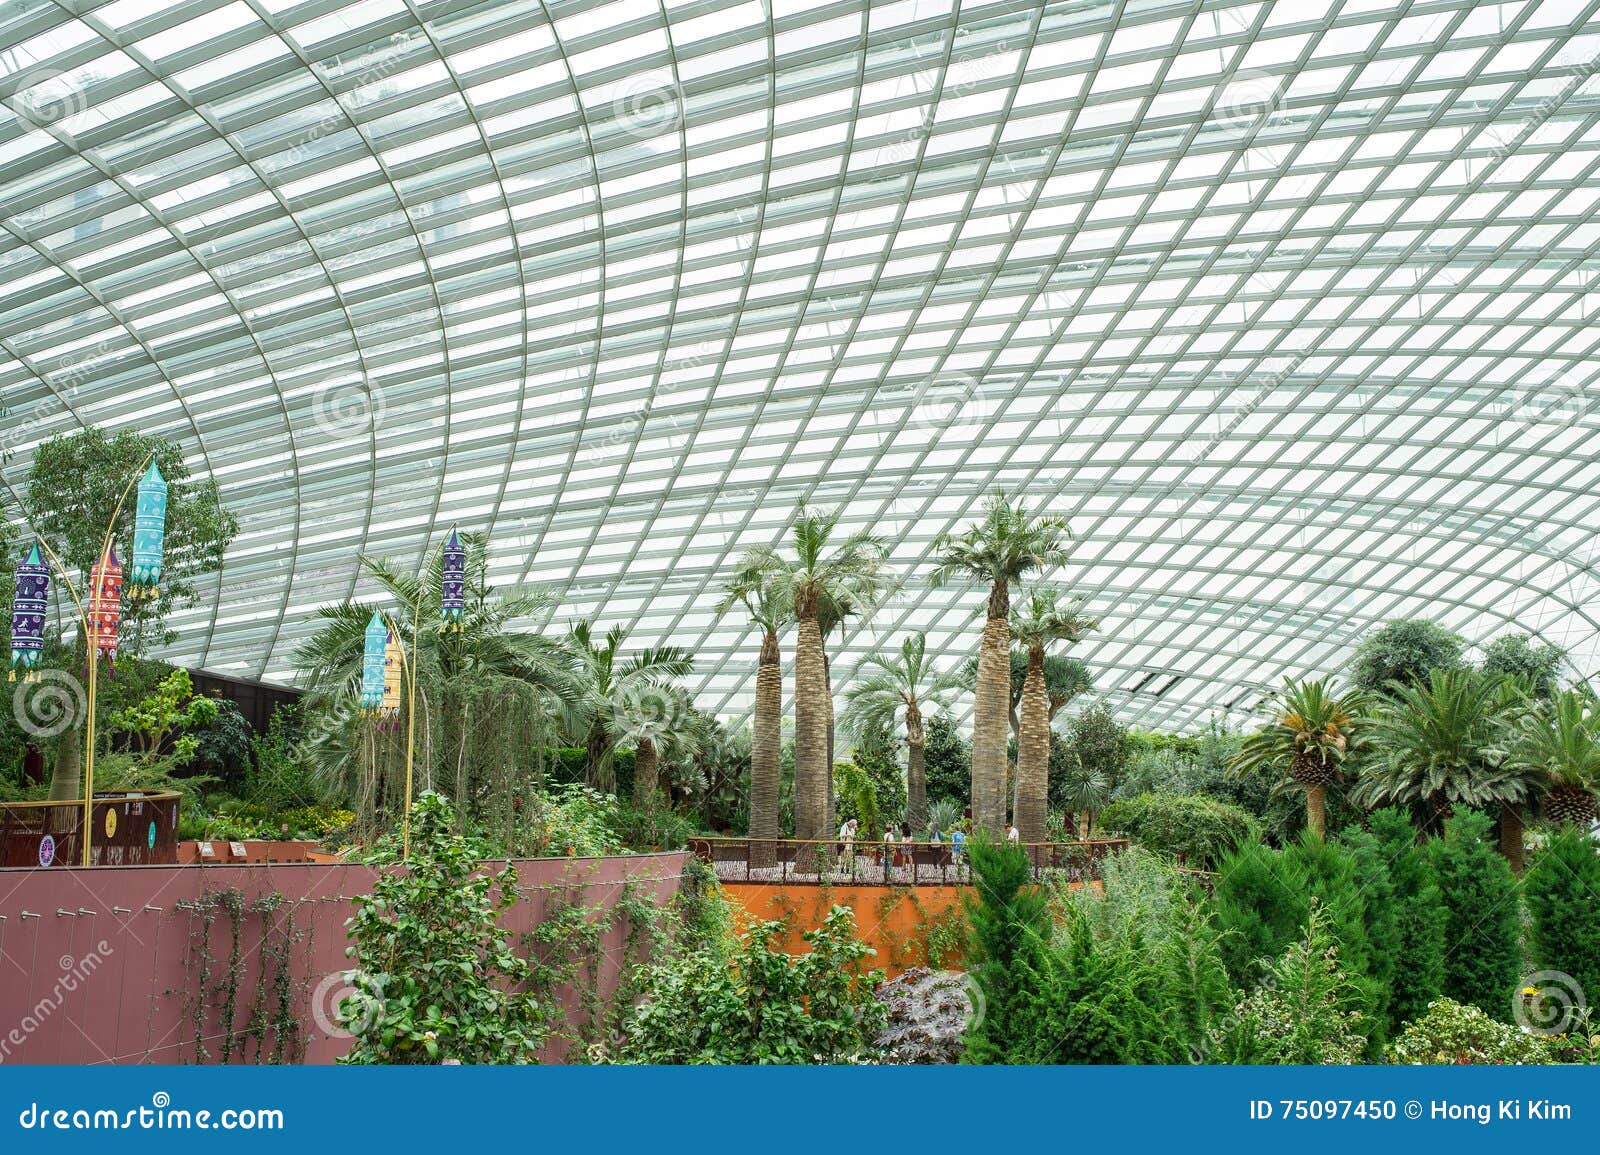 Dry Weather Dome Of Botanic Garden Singapore Editorial Image Image Of Building Beautiful 75097450